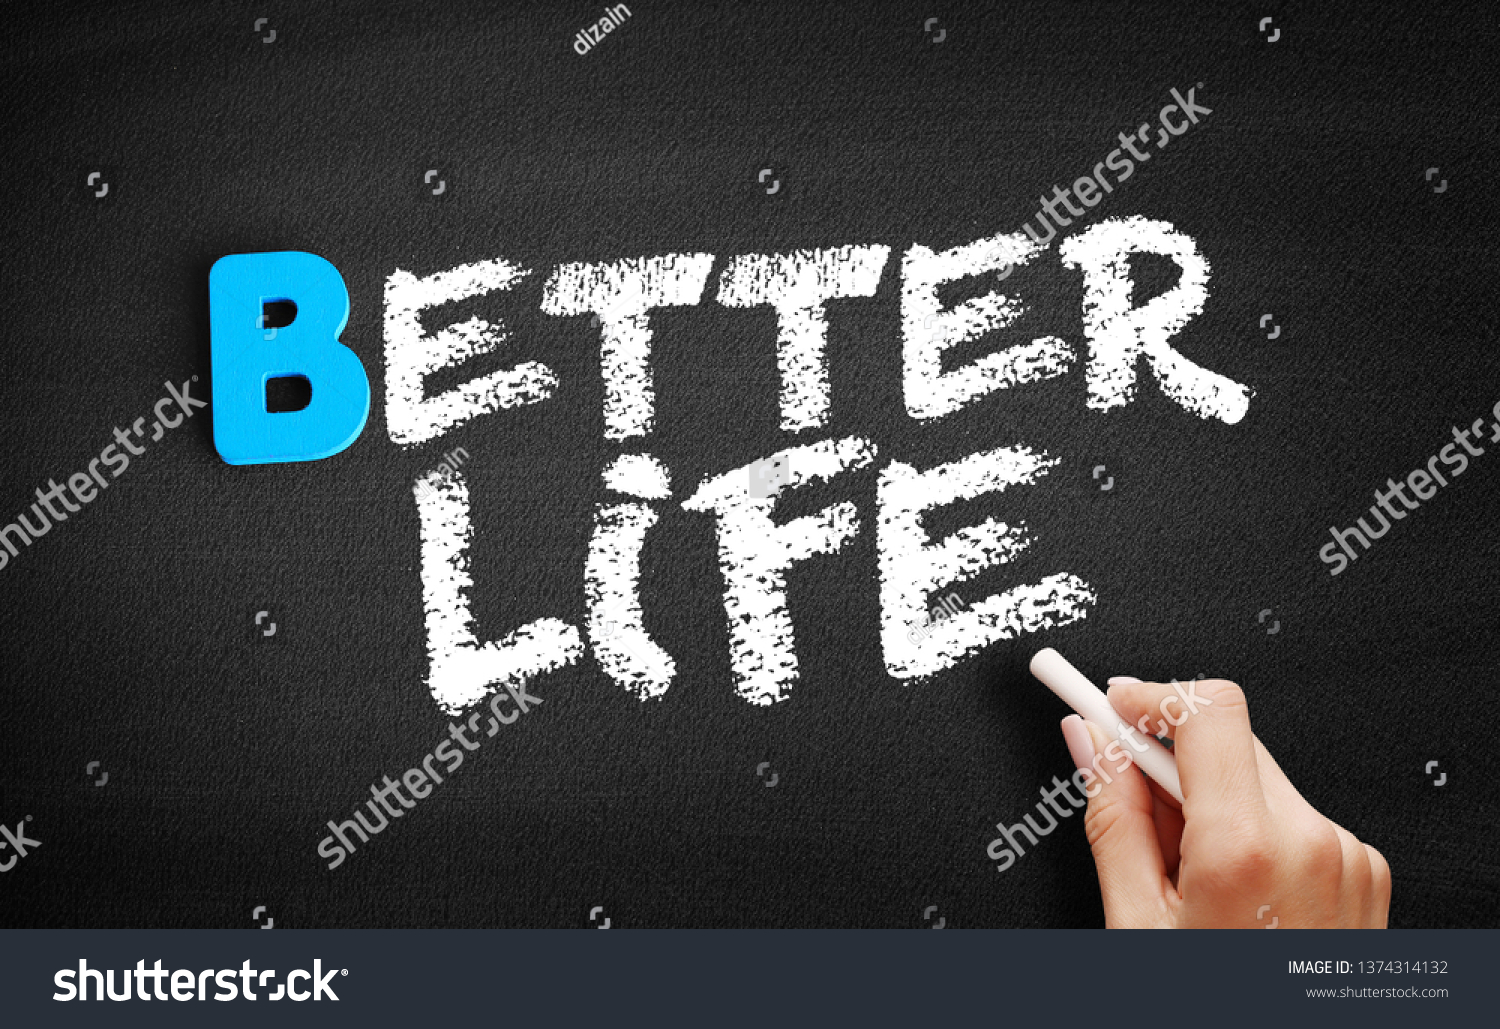 Better life text on blackboard, concept background #1374314132